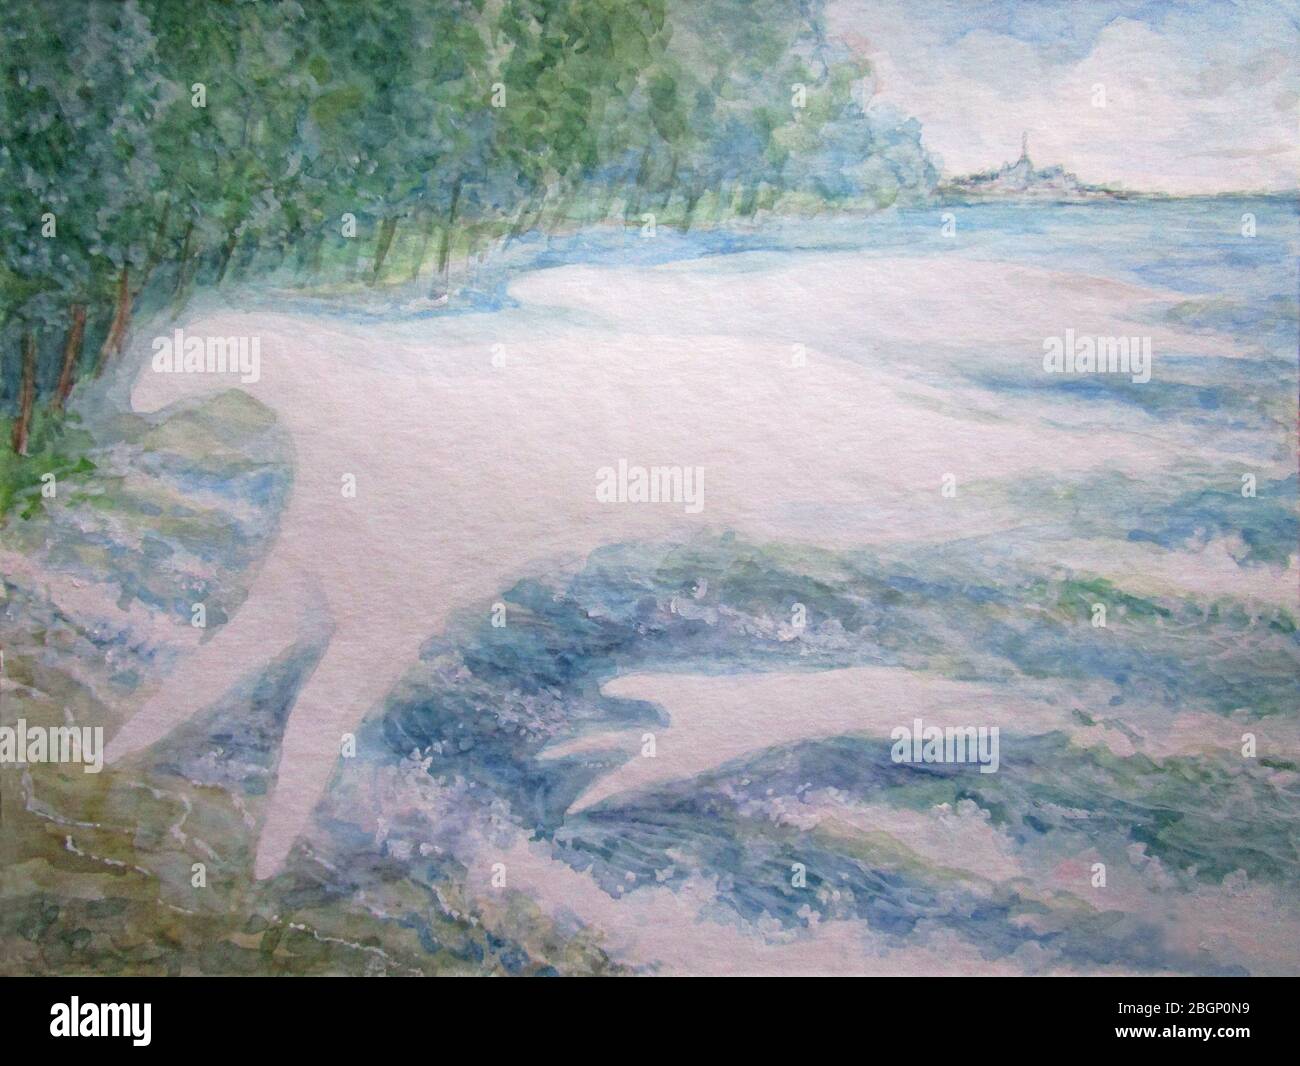 ghosts emerging from sea waves, watercolor illustration Stock Photo